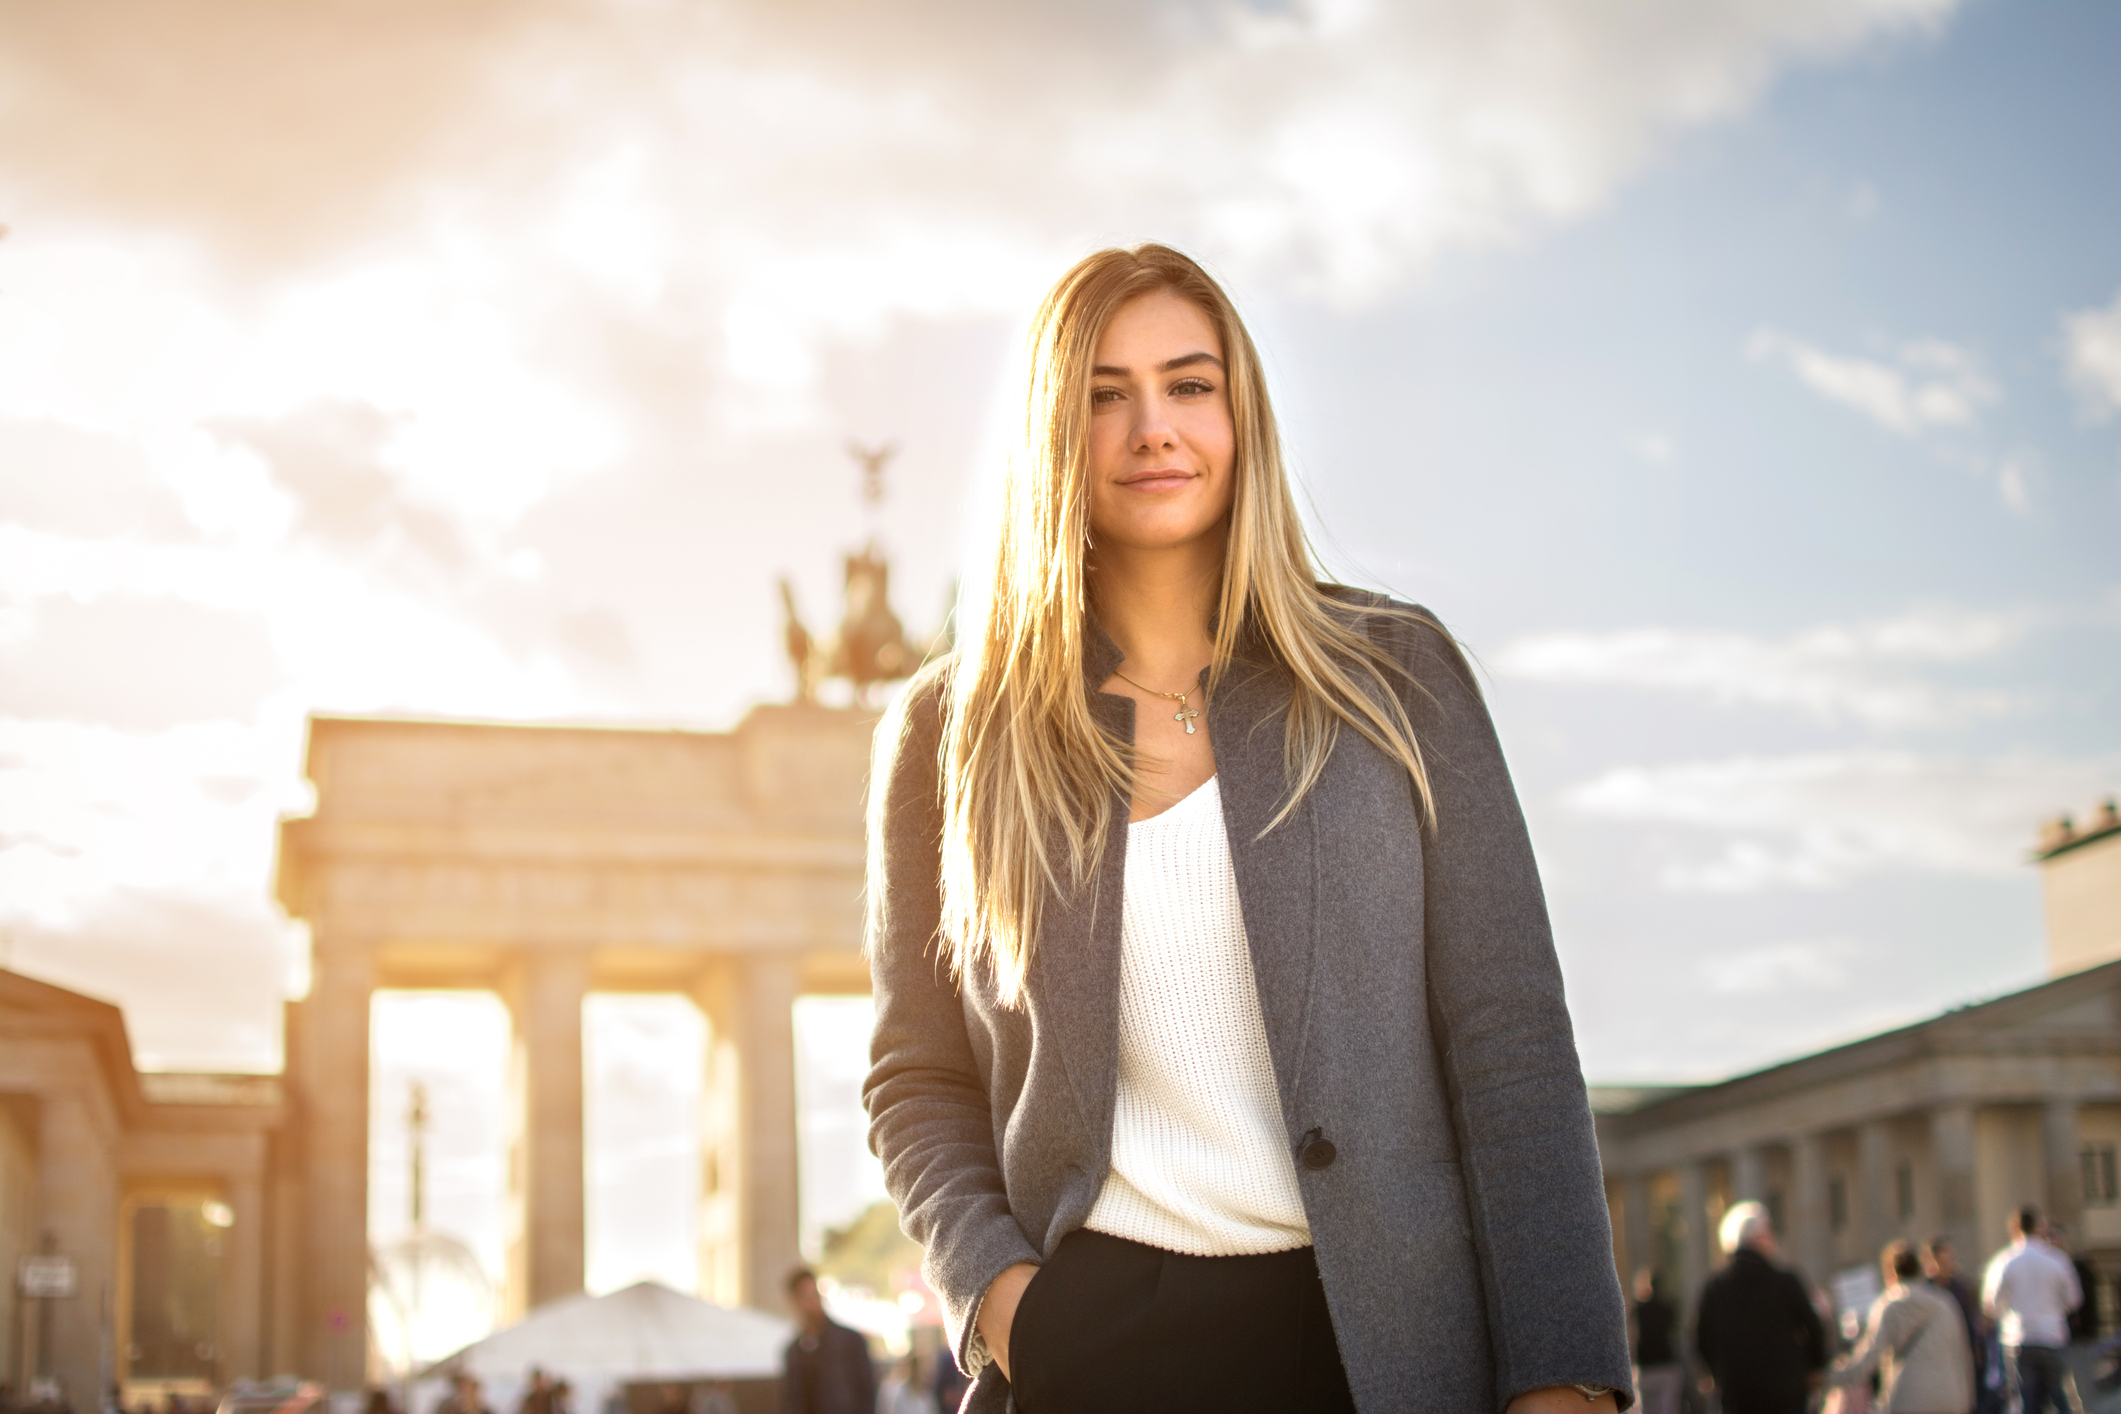 Portrait of smiling fashionable young woman in front of Brandenburger Tor in Berlin, Germany.